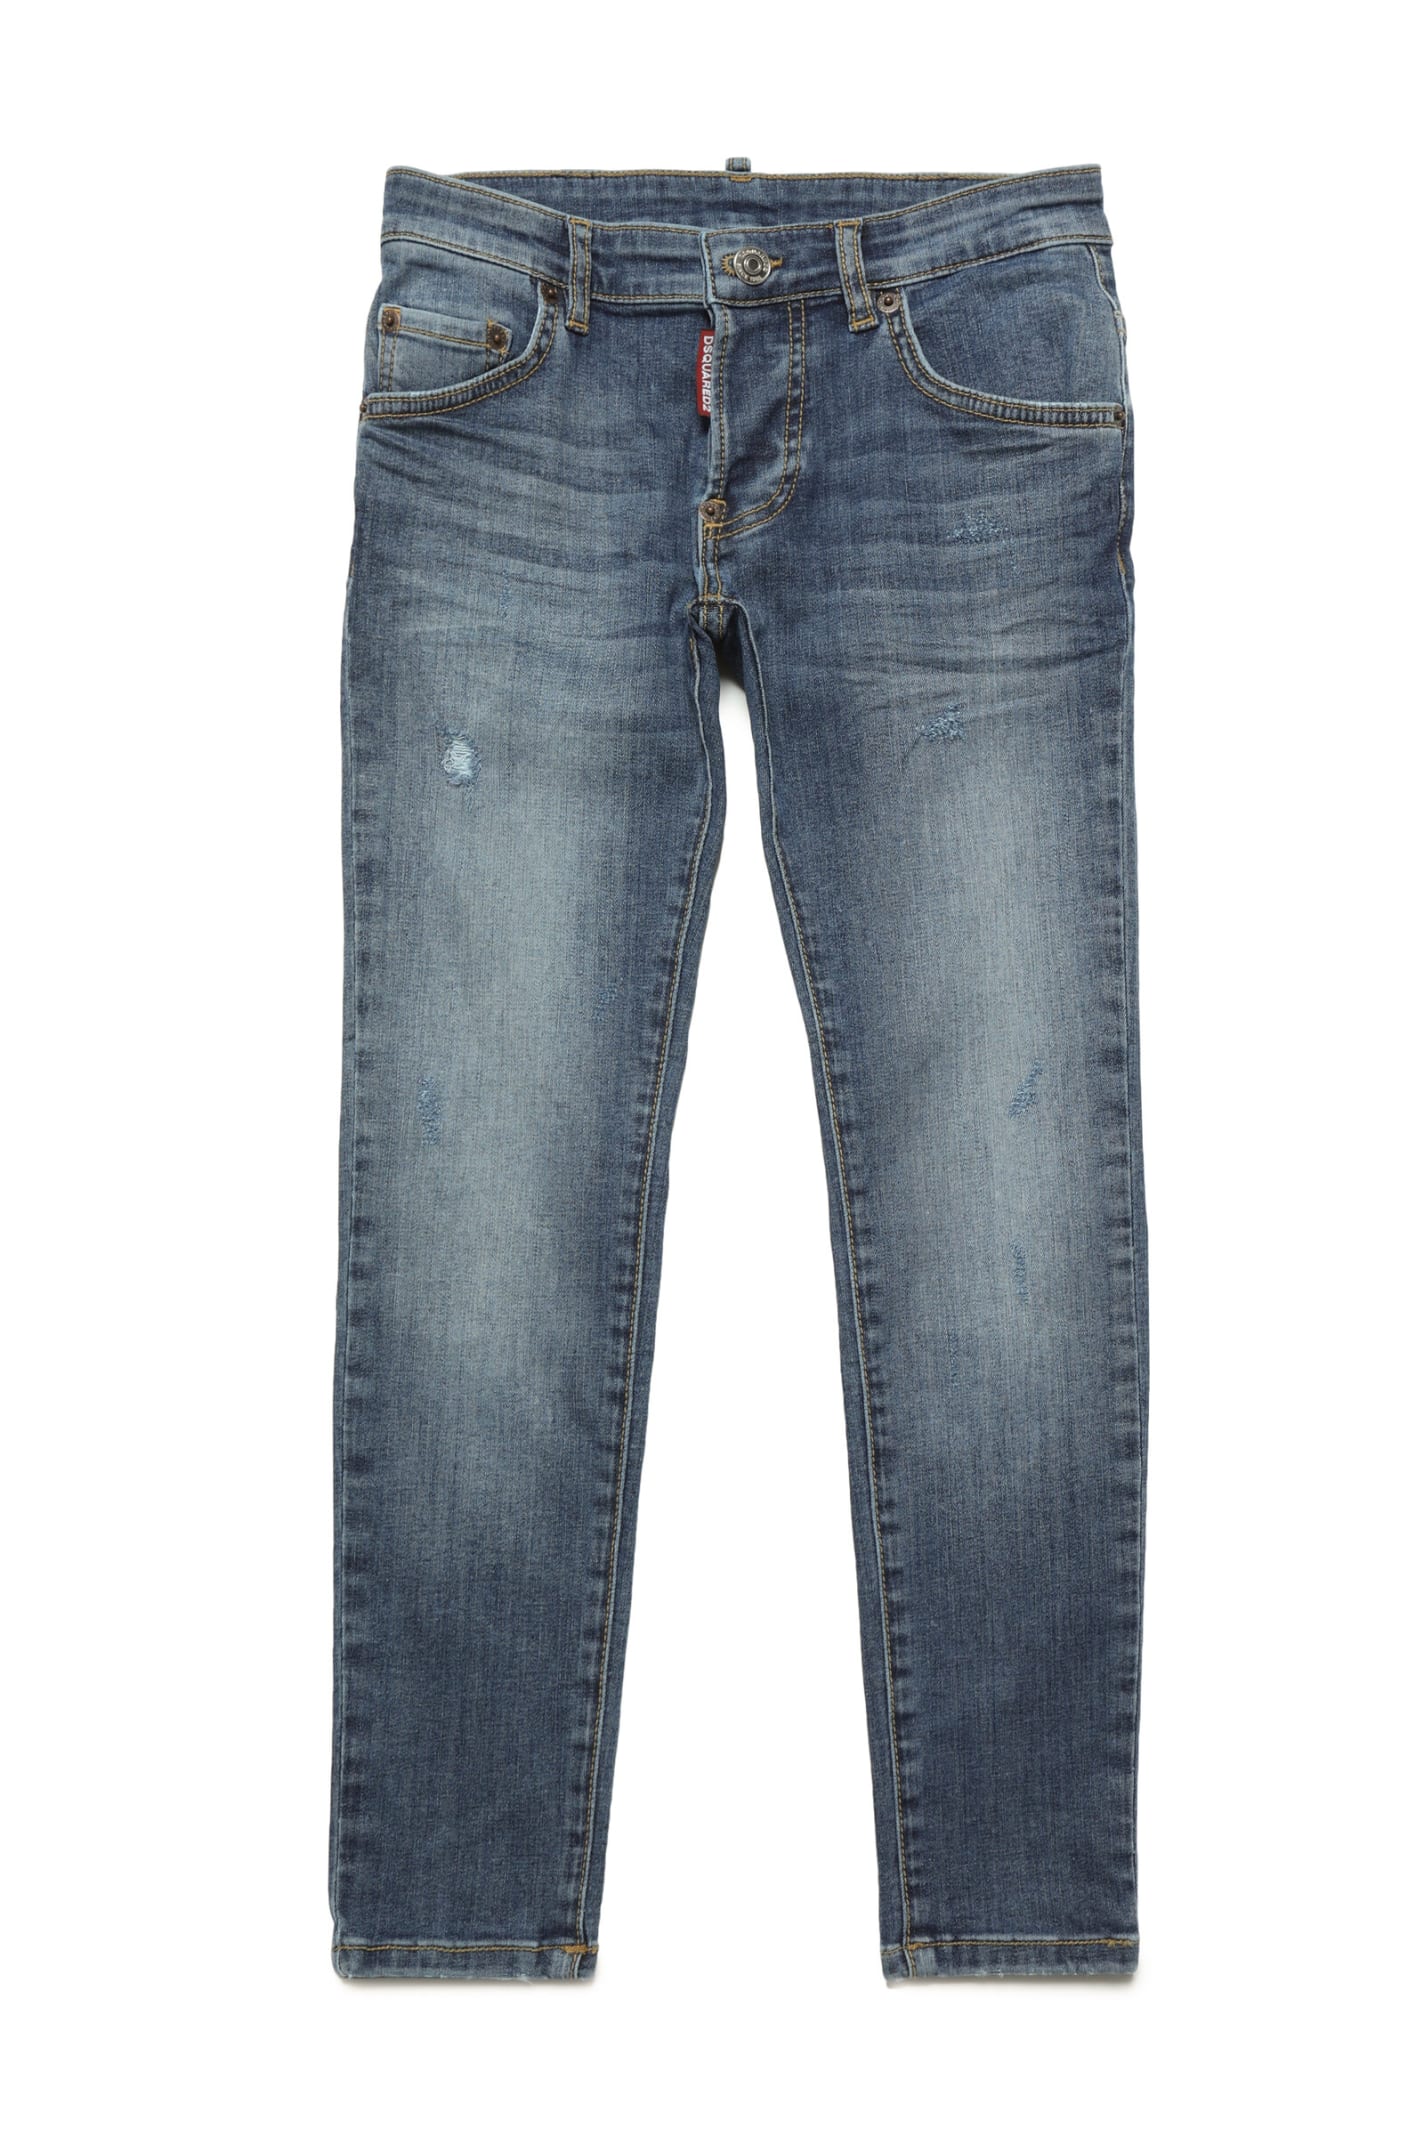 DSQUARED2 D2P118LM SKATER JEAN TROUSERS DSQUARED MEDIUM BLUE SKINNY SKATER JEANS SHADED WITH BREAKS